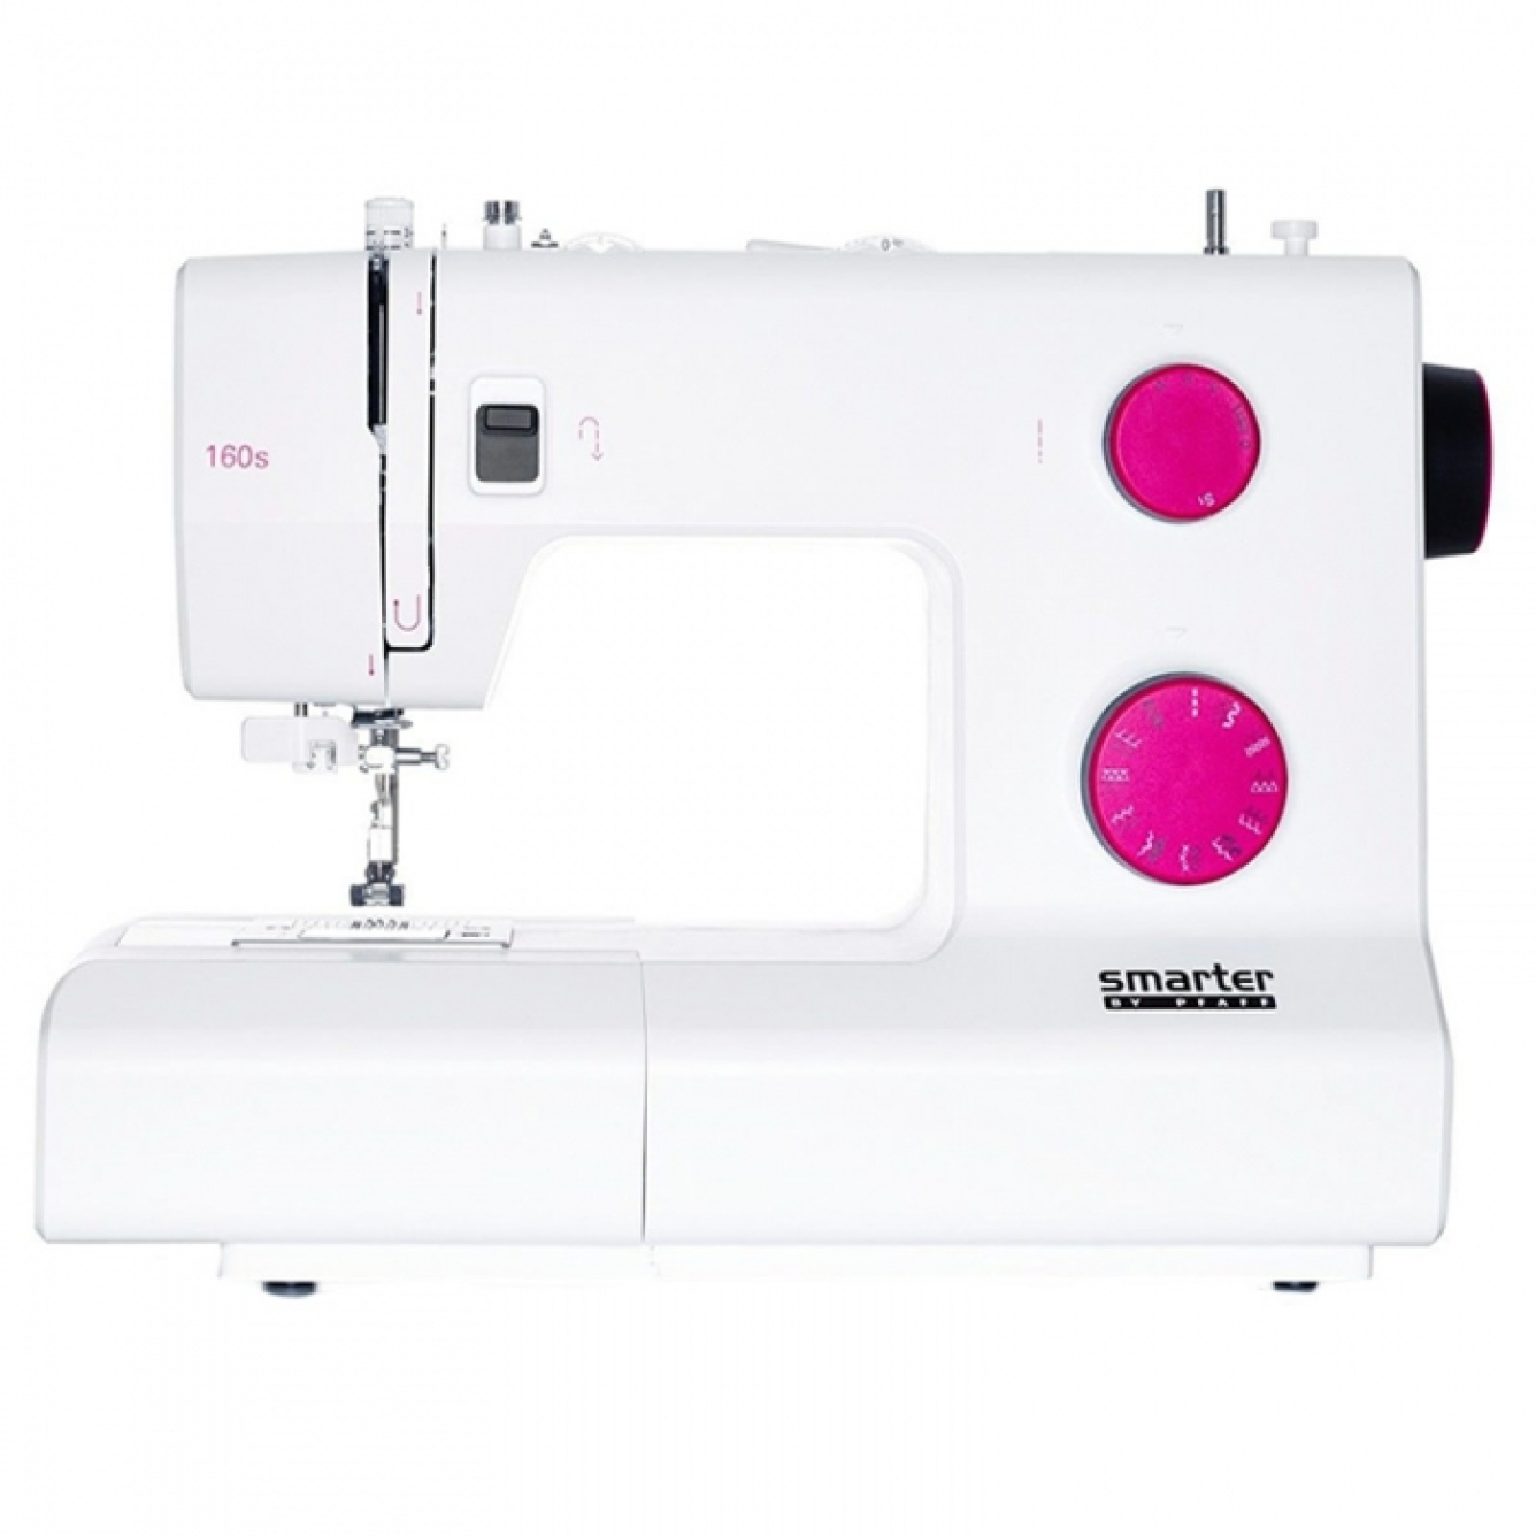 Pfaff smarter 160s sewing machine | More Sewing